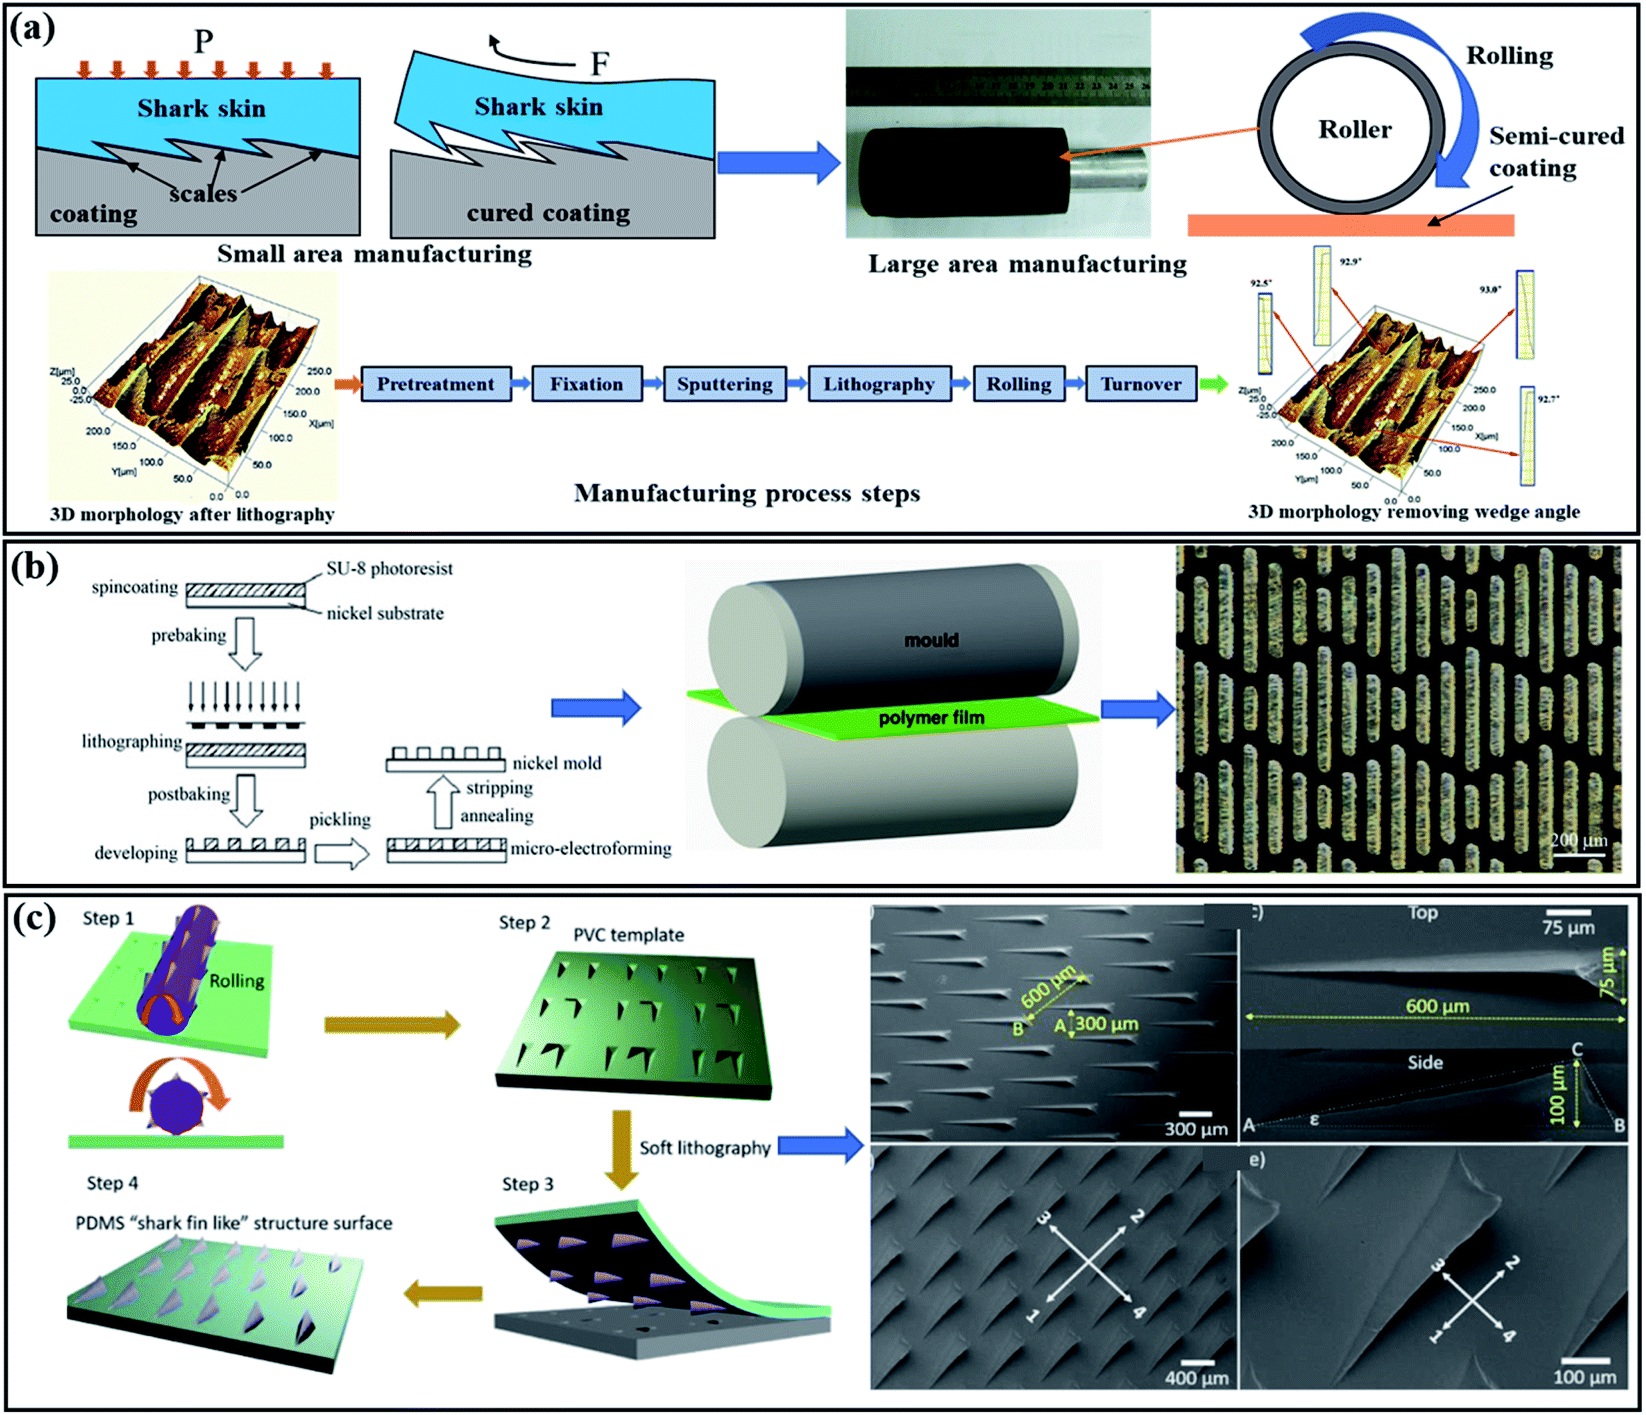 Thriving artificial underwater drag-reduction materials inspired from  aquatic animals: progresses and challenges - RSC Advances (RSC Publishing)  DOI:10.1039/D0RA08672J